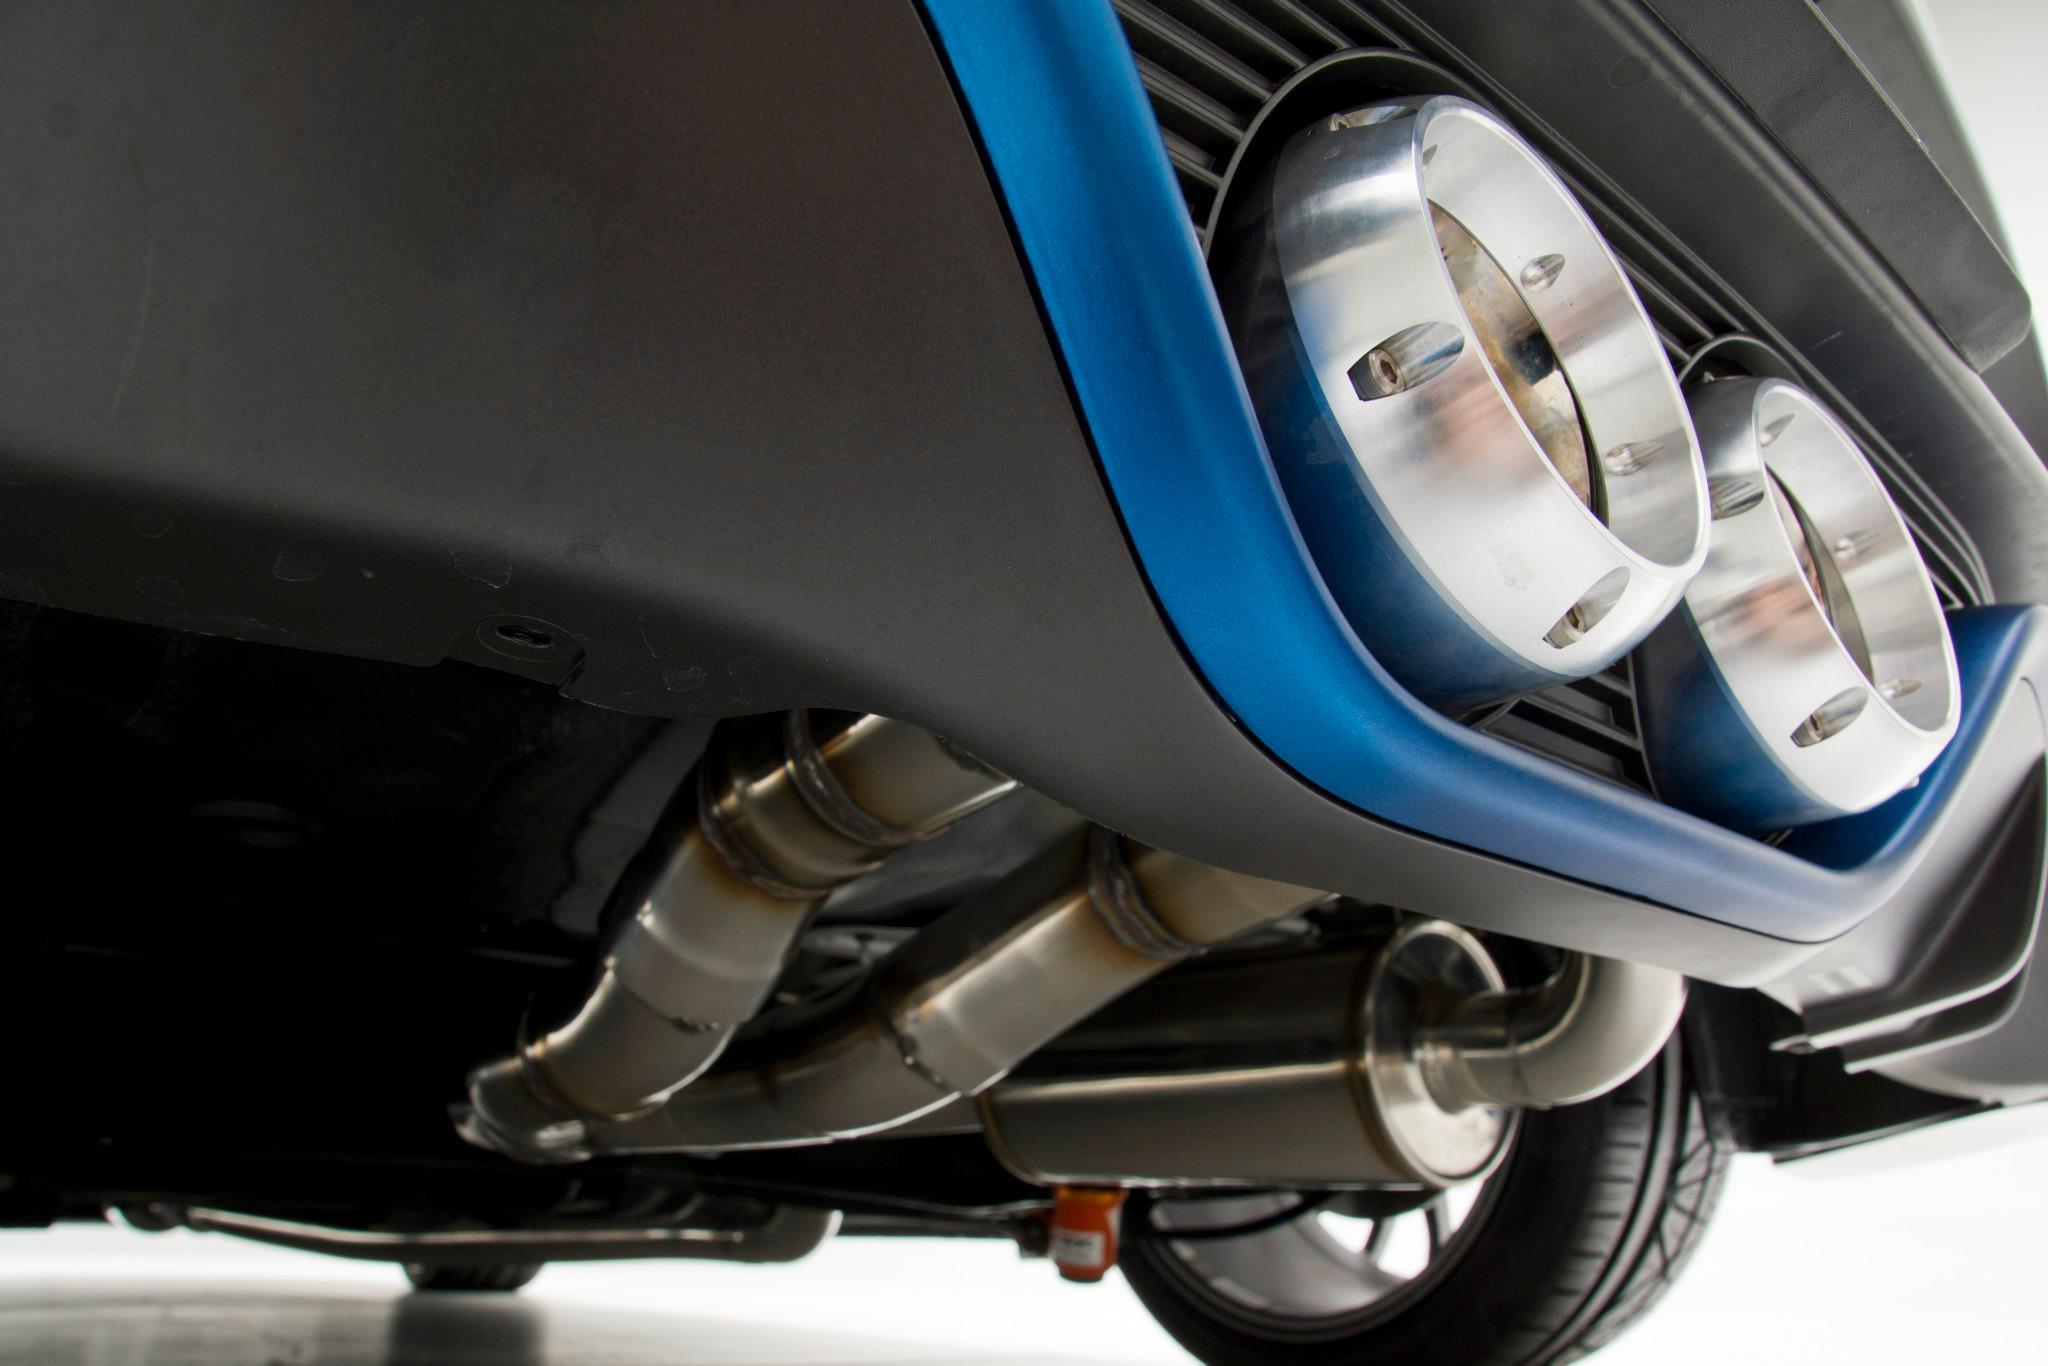 2012 Veloster Turbo Alpine Edition -  ARK Performance DT-S exhaust system, ARK Performance down pipes: